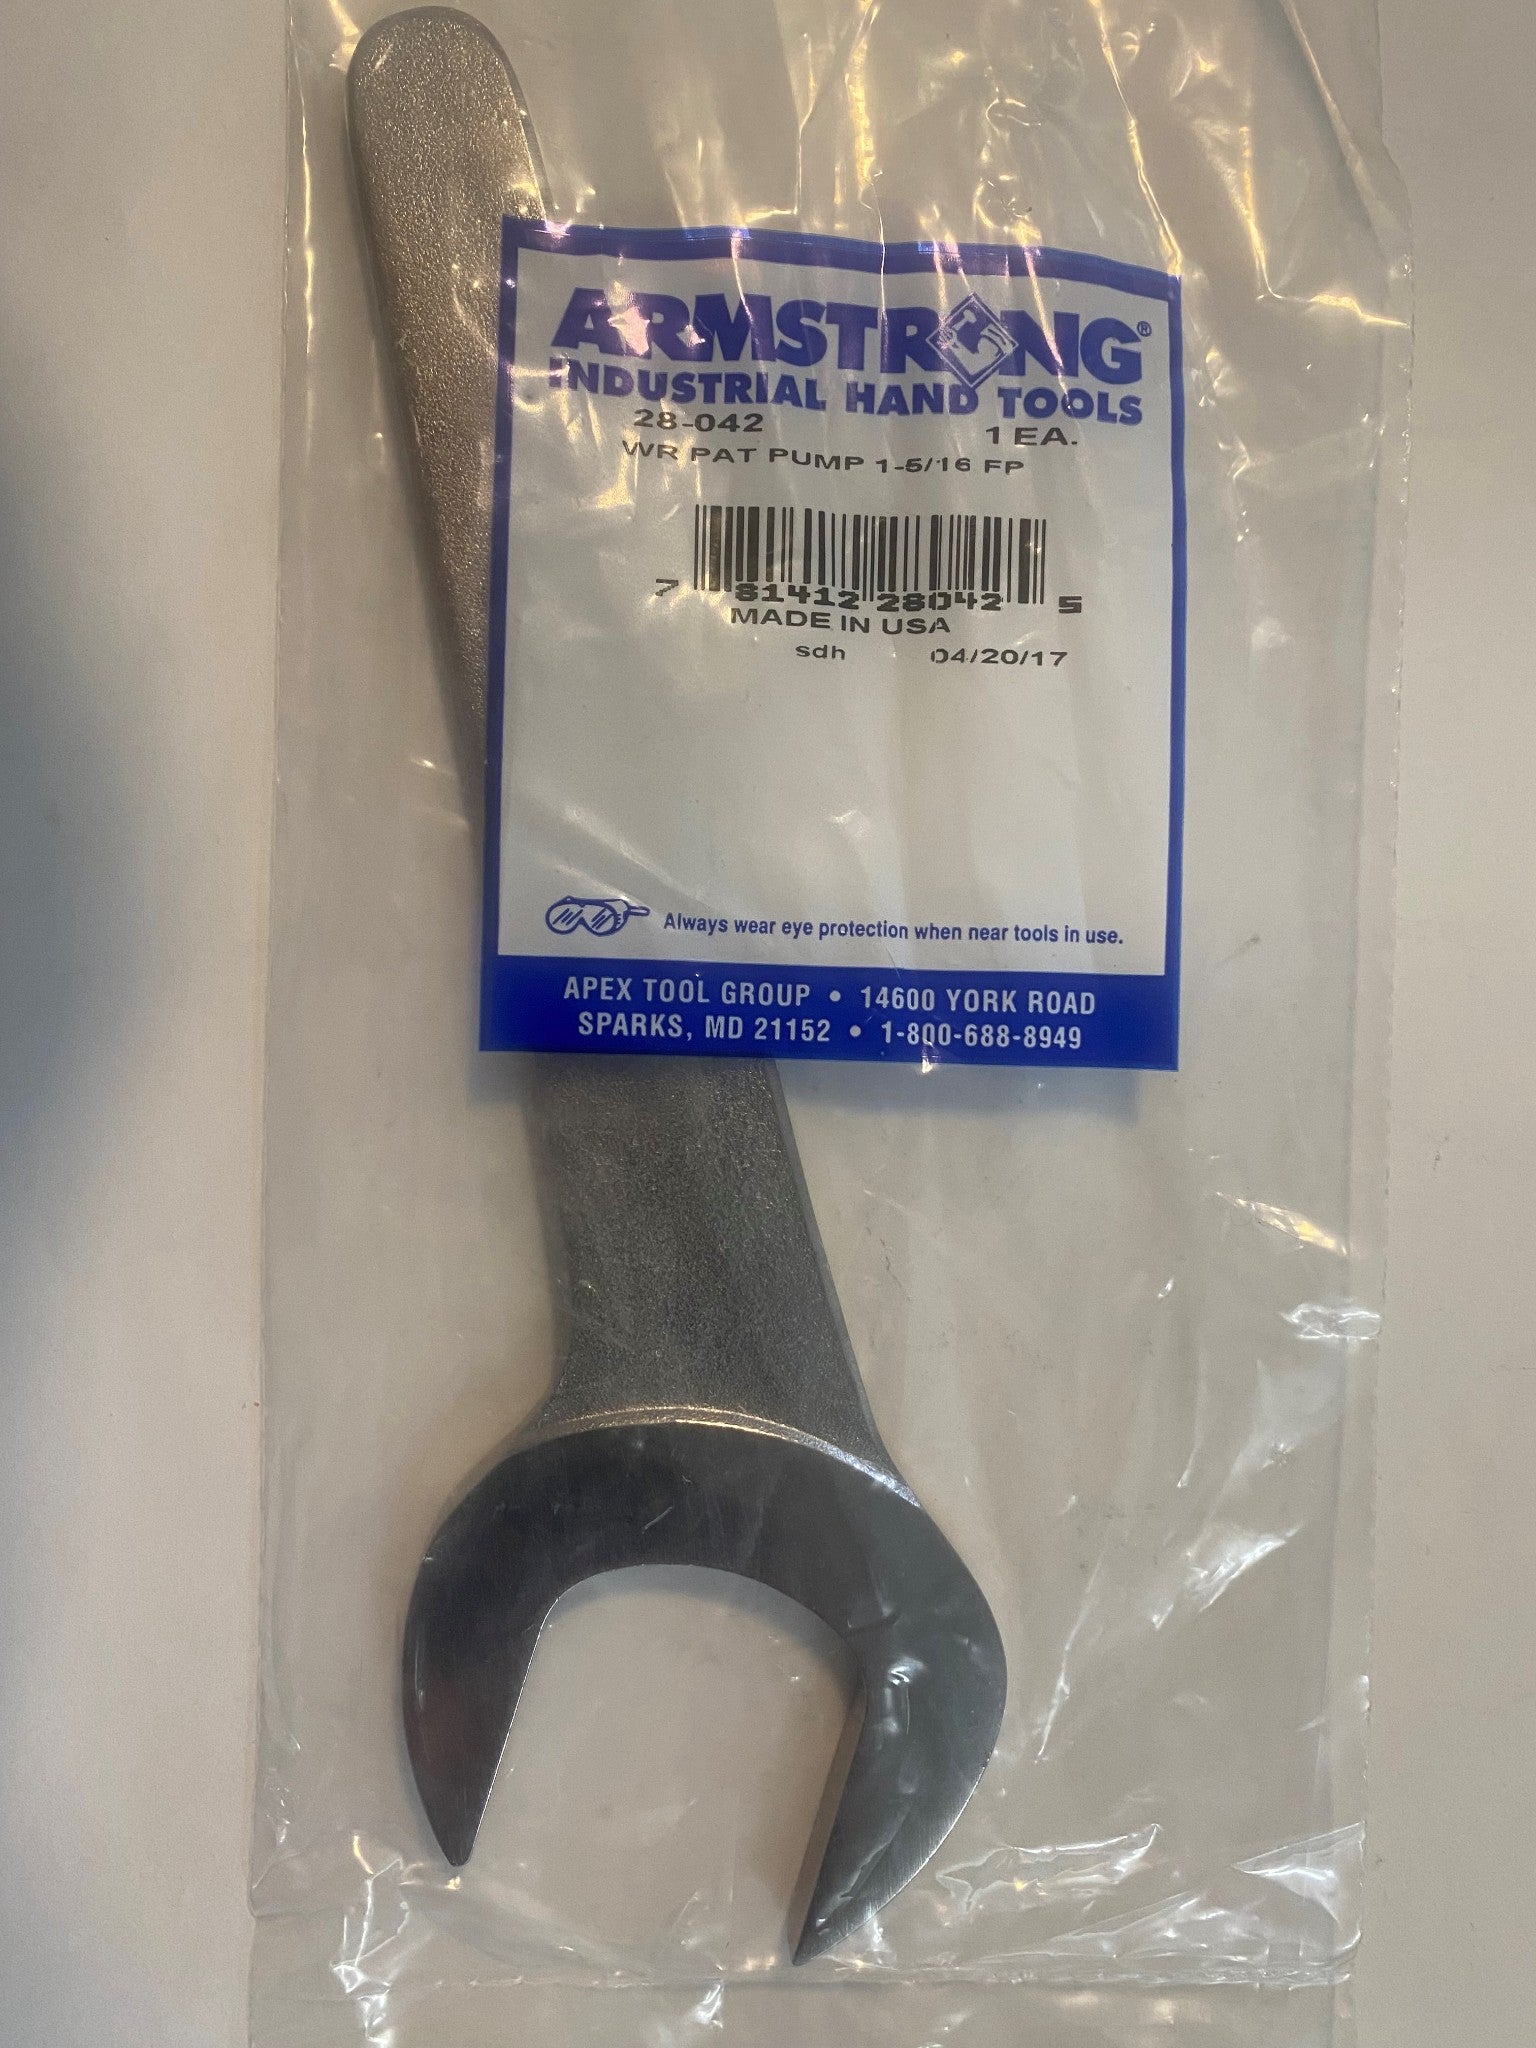 Armstrong 28-042 Service Pump Wrench 1-5/16" Chrome Thin Pattern USA